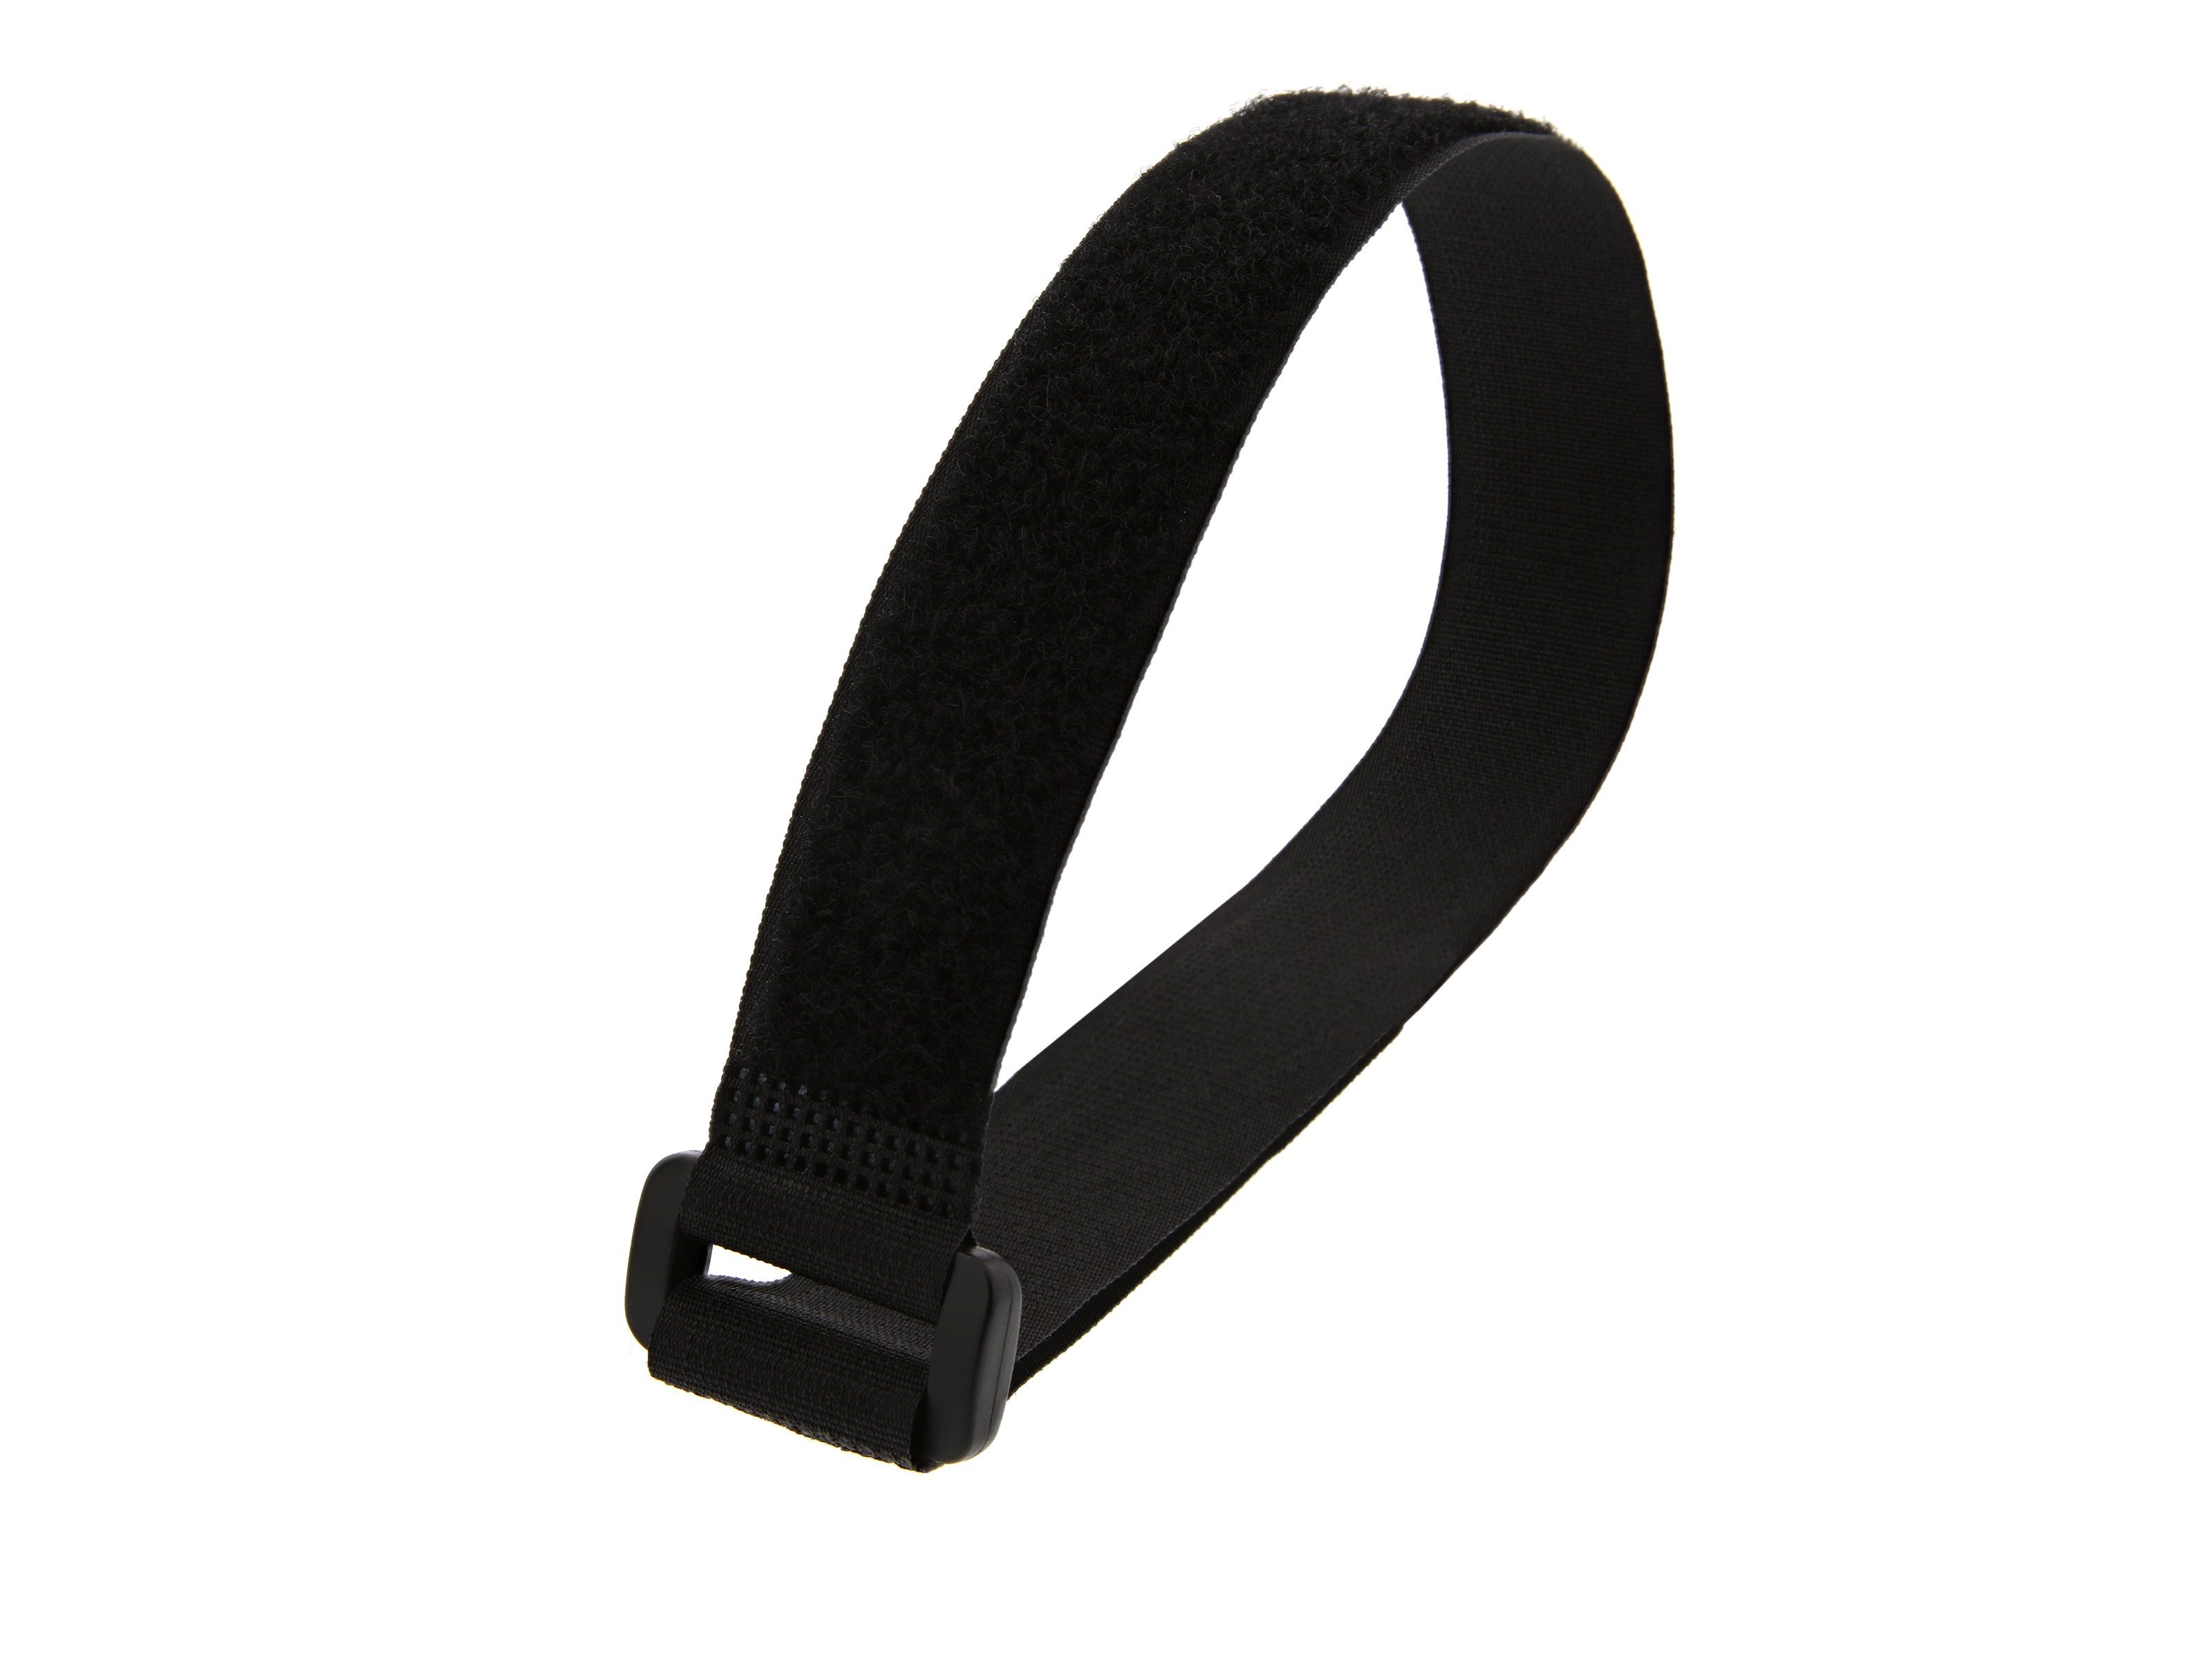 Secure Cable Ties 18 x 2 inch Heavy Duty Black Cinch Strap - 5 Pack